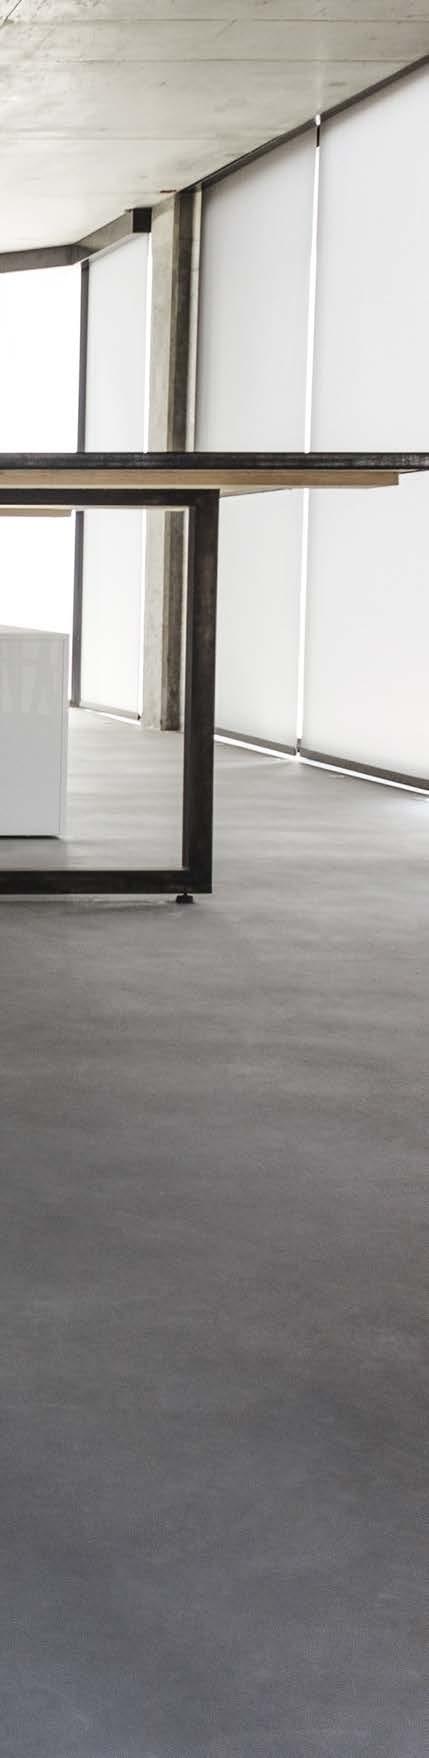 NEOCEMENT NEO-INDUSTRIAL CHIC Neocement is a continuous, joint free, decorative finish specifically designed to create or renovate interior or exterior walls and floors.